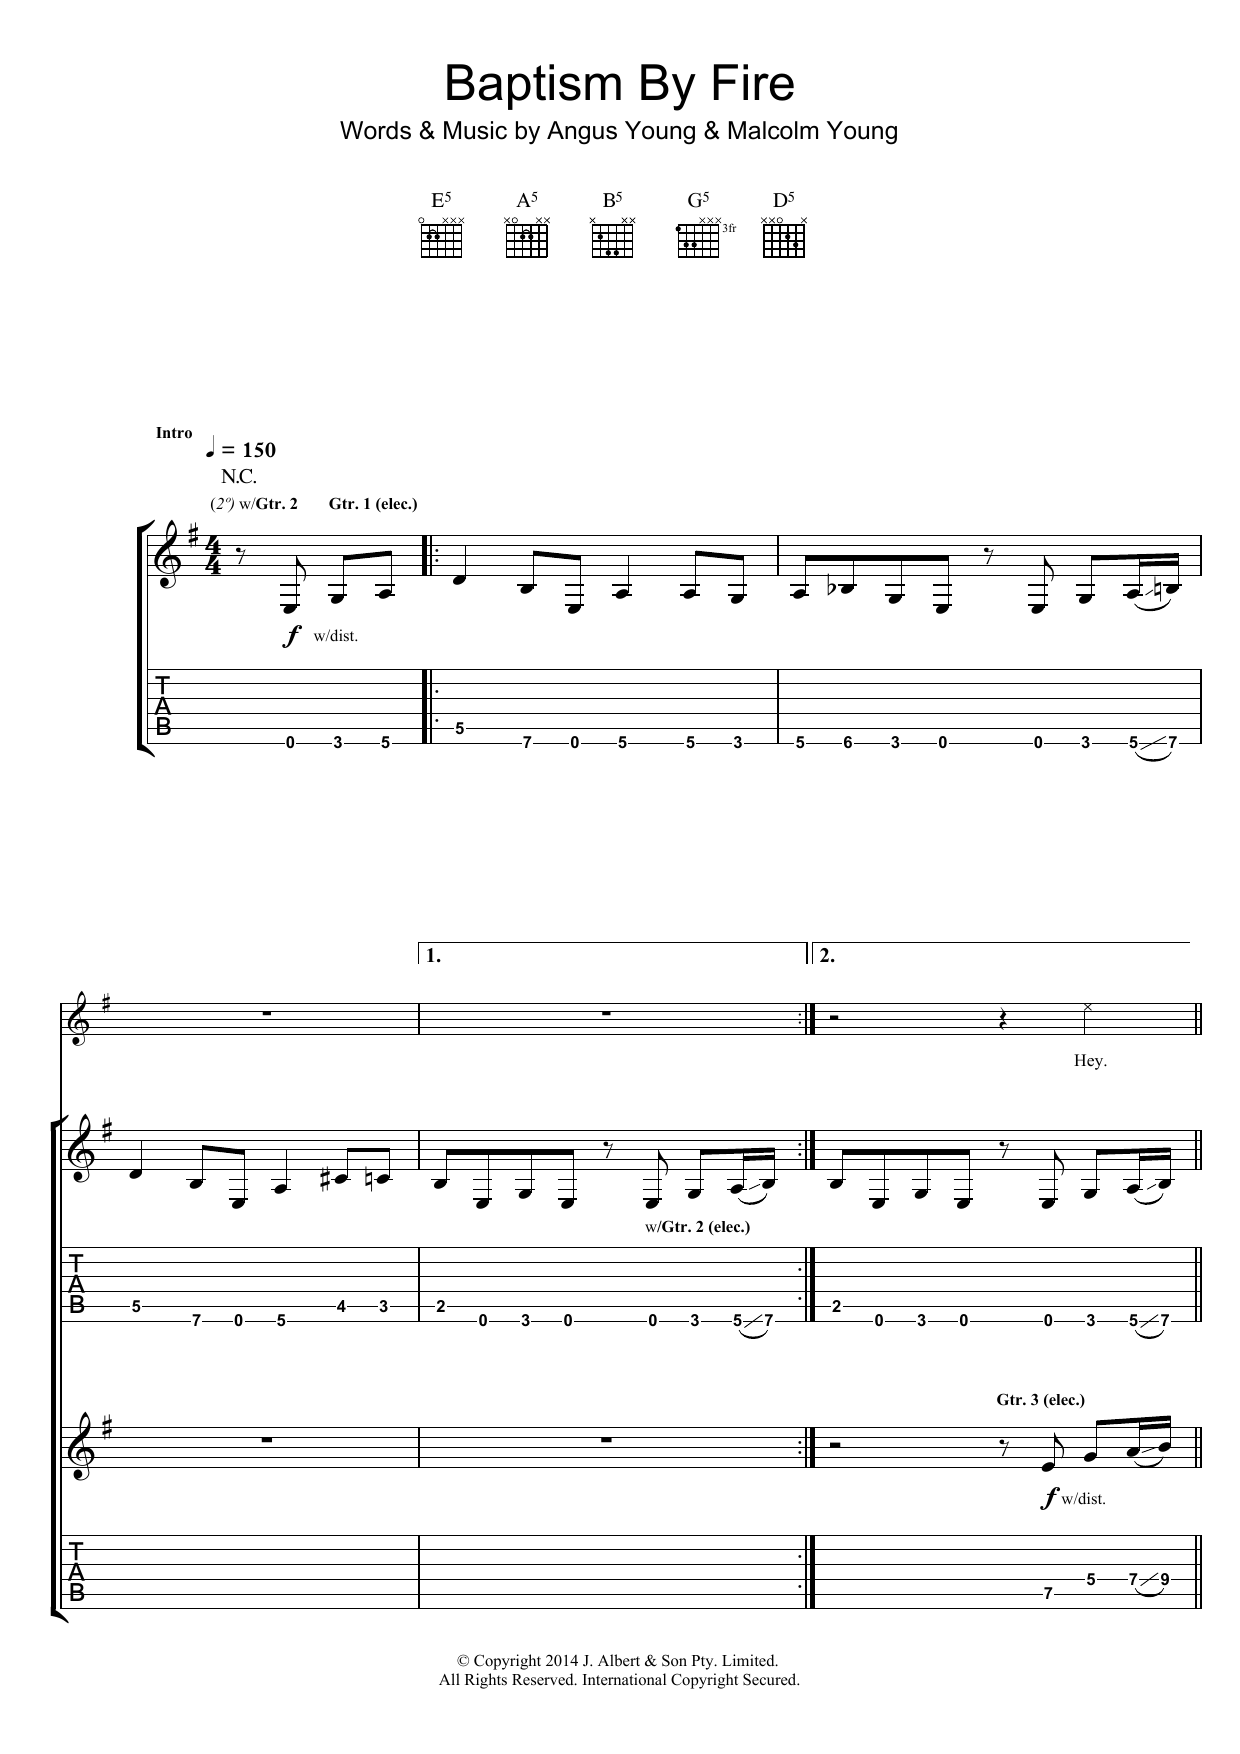 Download AC/DC Baptism By Fire Sheet Music